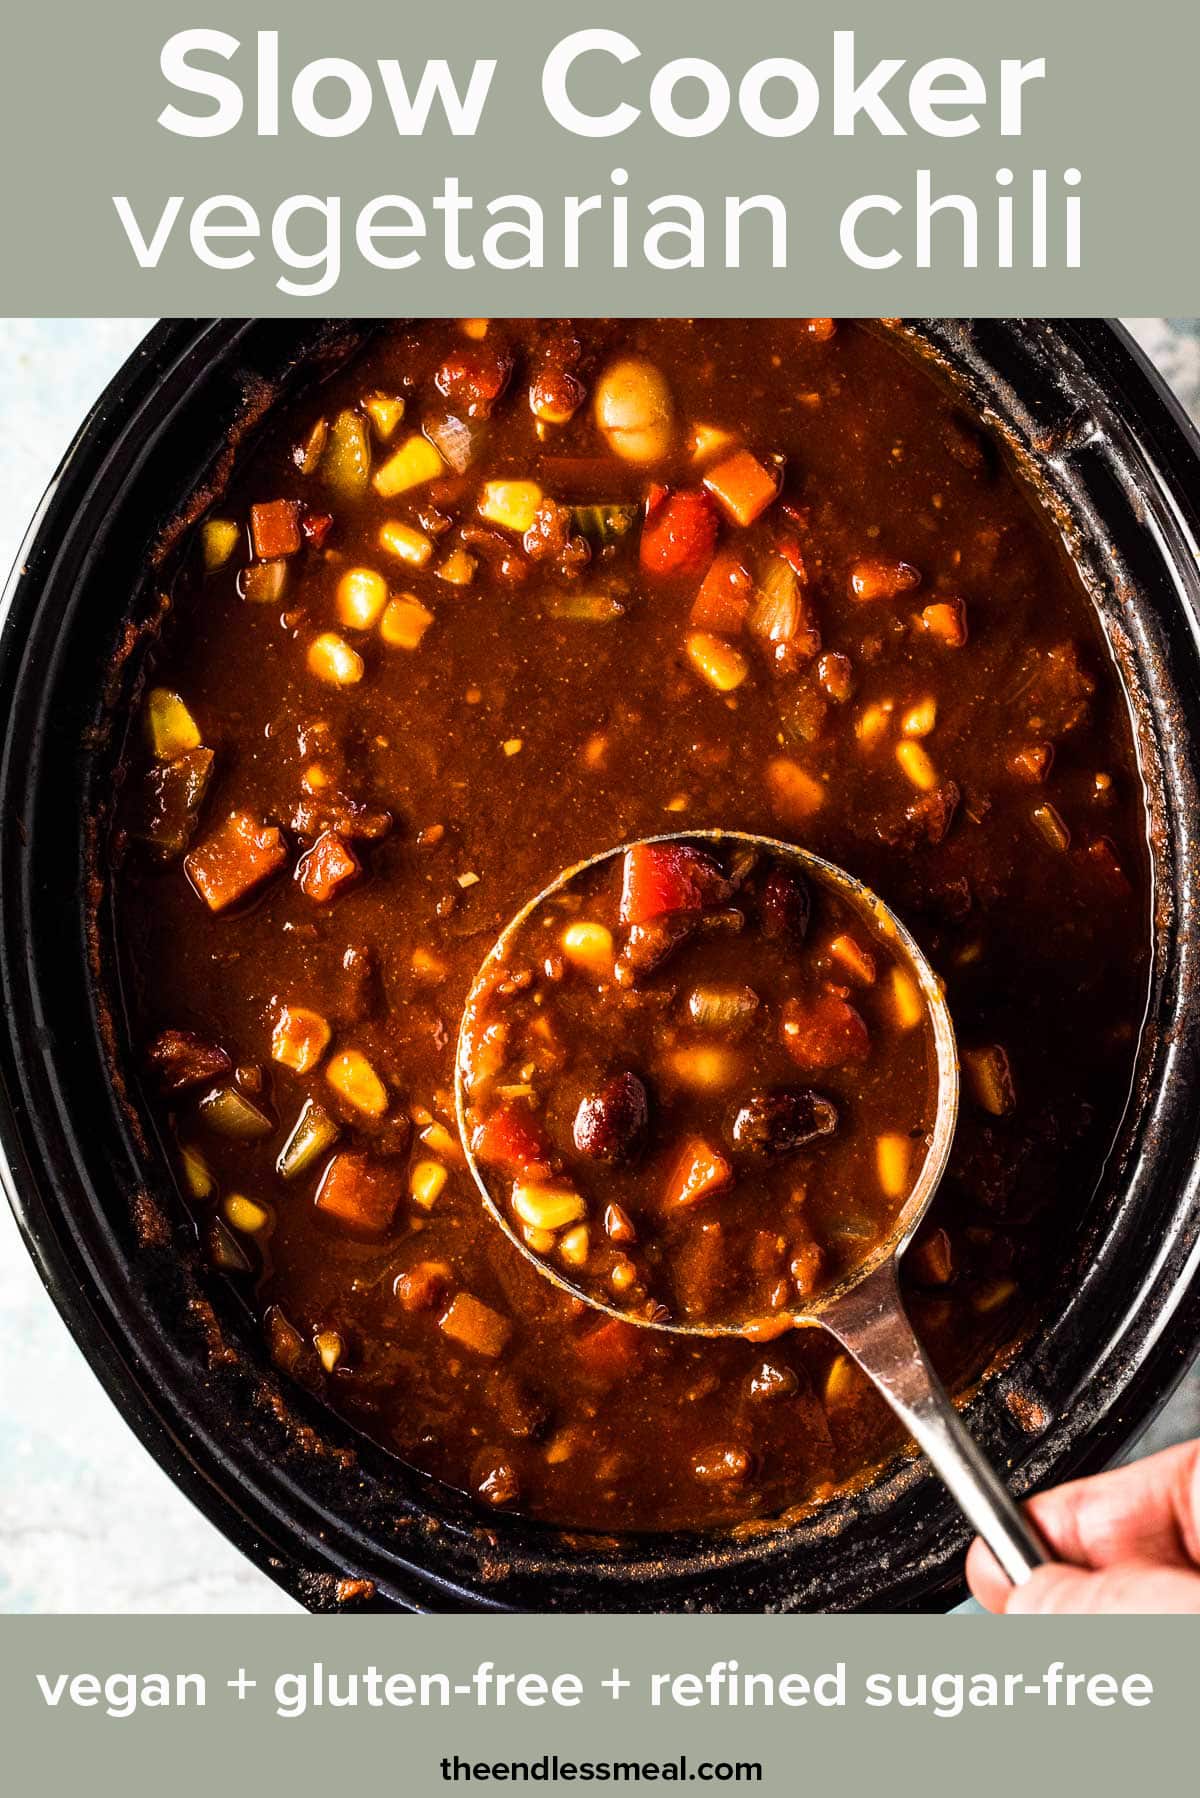 Looking down on vegetarian chili in a slow cooker with a ladle taking a scoop and the recipe title on top of the picture.